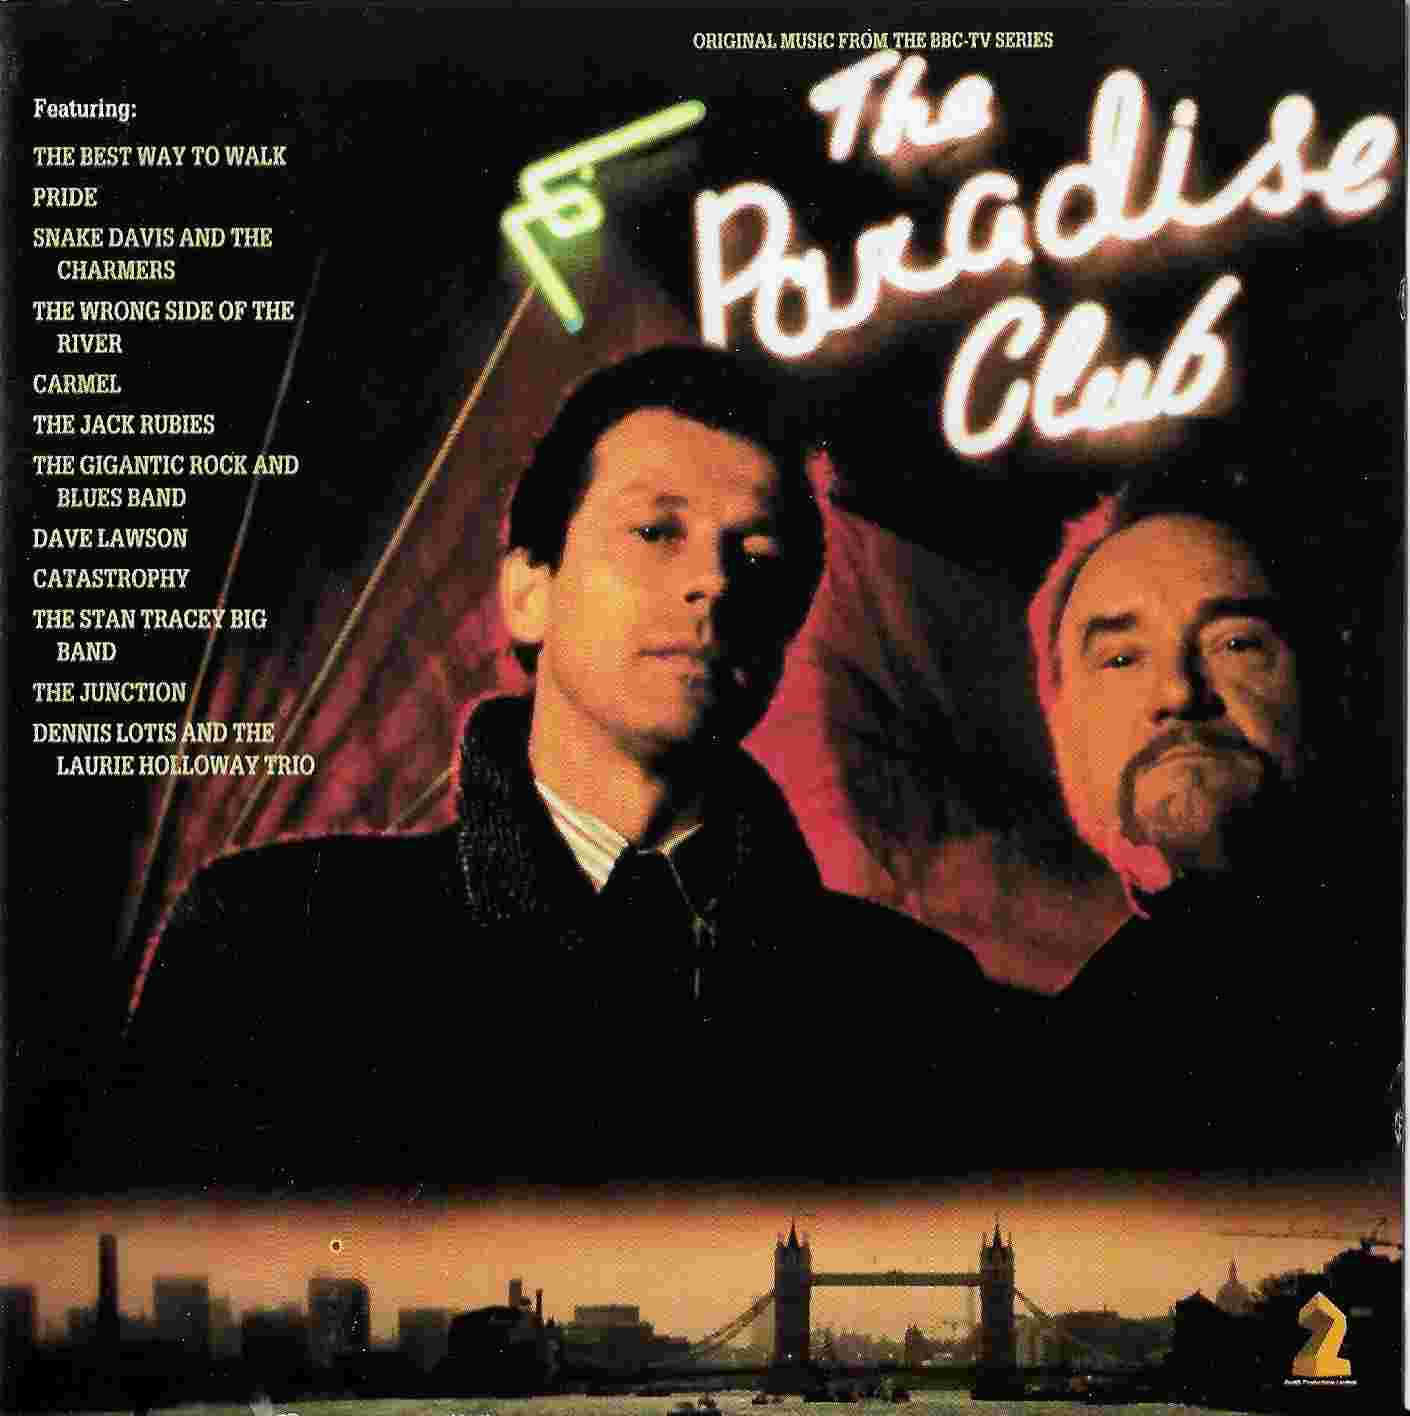 Picture of The Paradise Club by artist Various from the BBC cds - Records and Tapes library